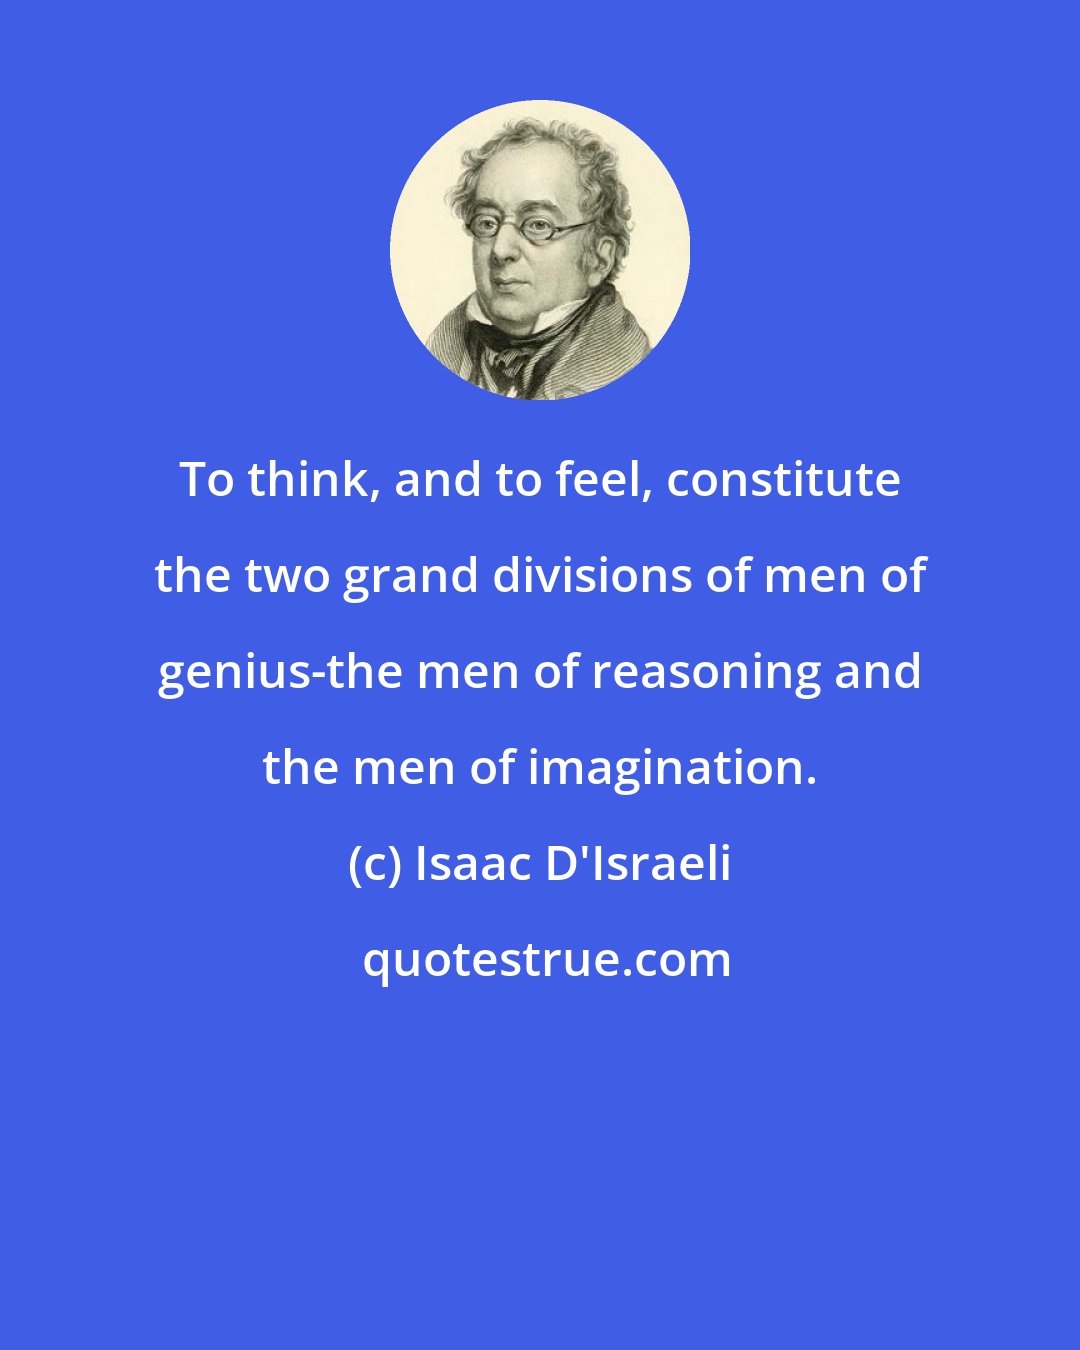 Isaac D'Israeli: To think, and to feel, constitute the two grand divisions of men of genius-the men of reasoning and the men of imagination.